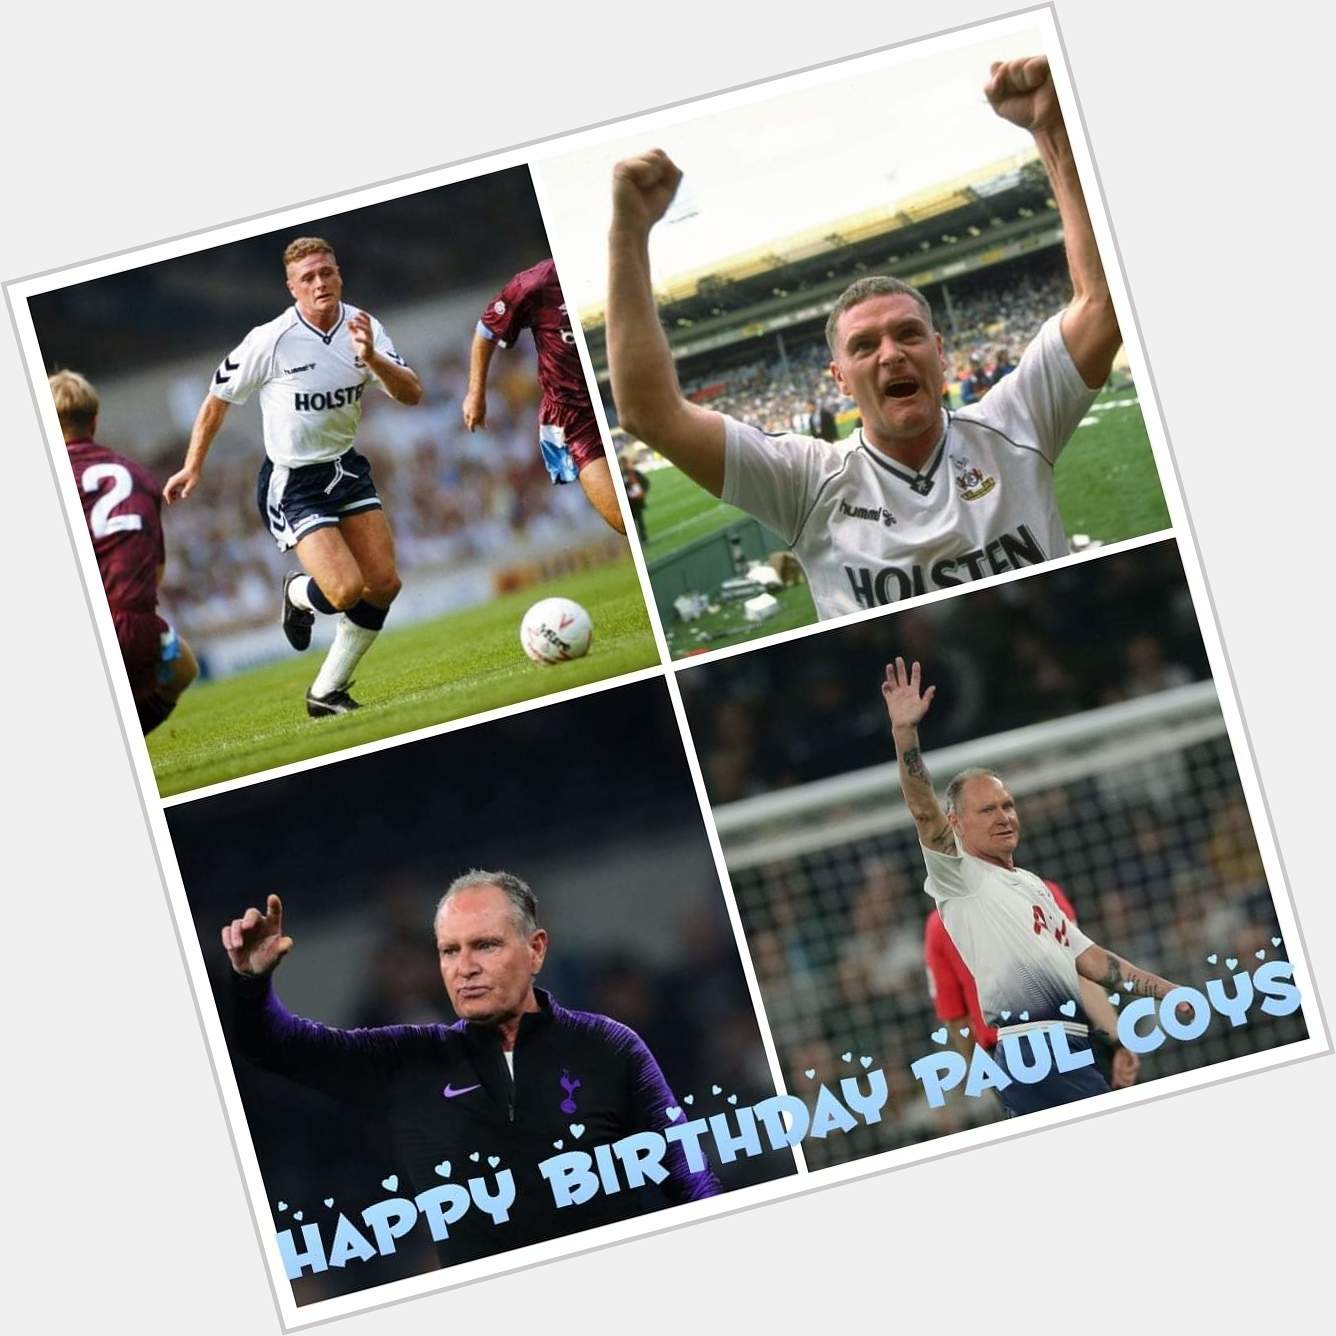 Happy 54th Birthday to Paul Gascoigne. Have a lovely day. Best wishes. COYS 